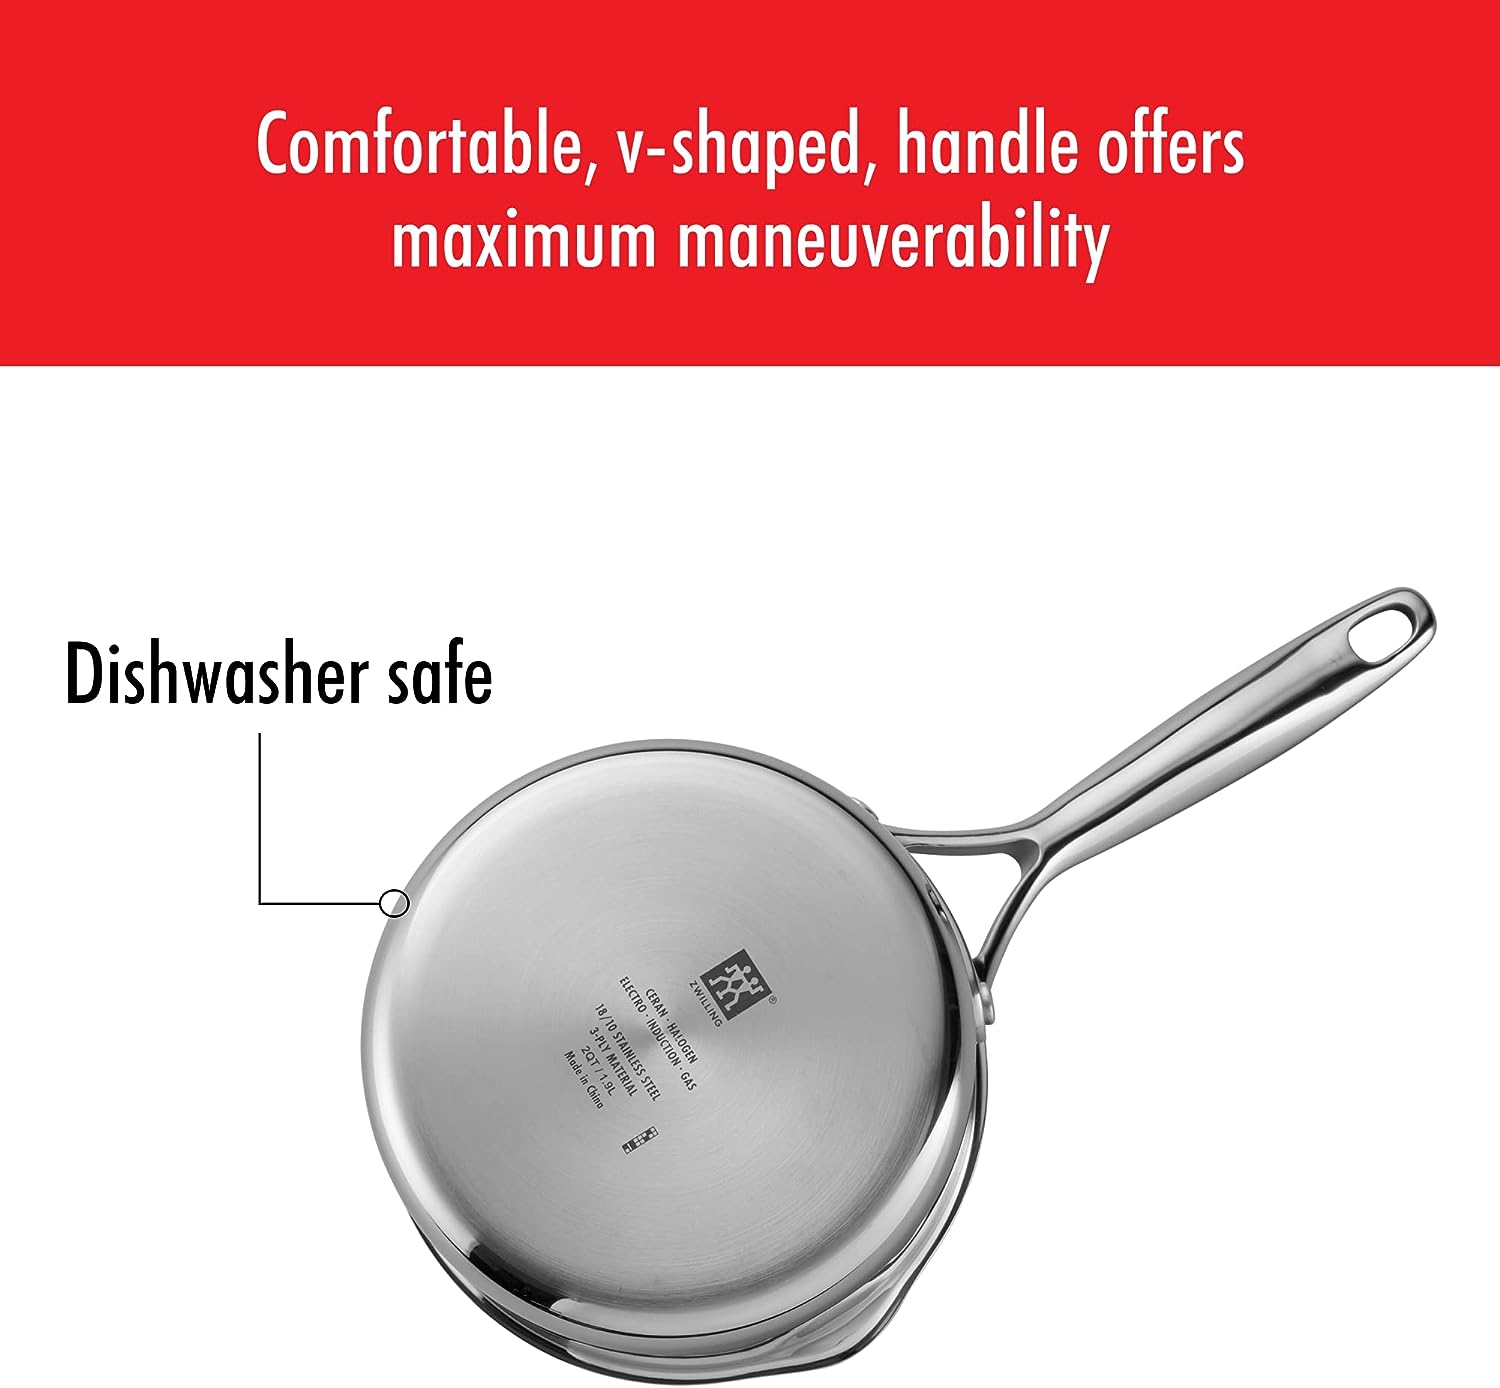 Zwilling Spirit Cookware Set - Product Review After Using for 18